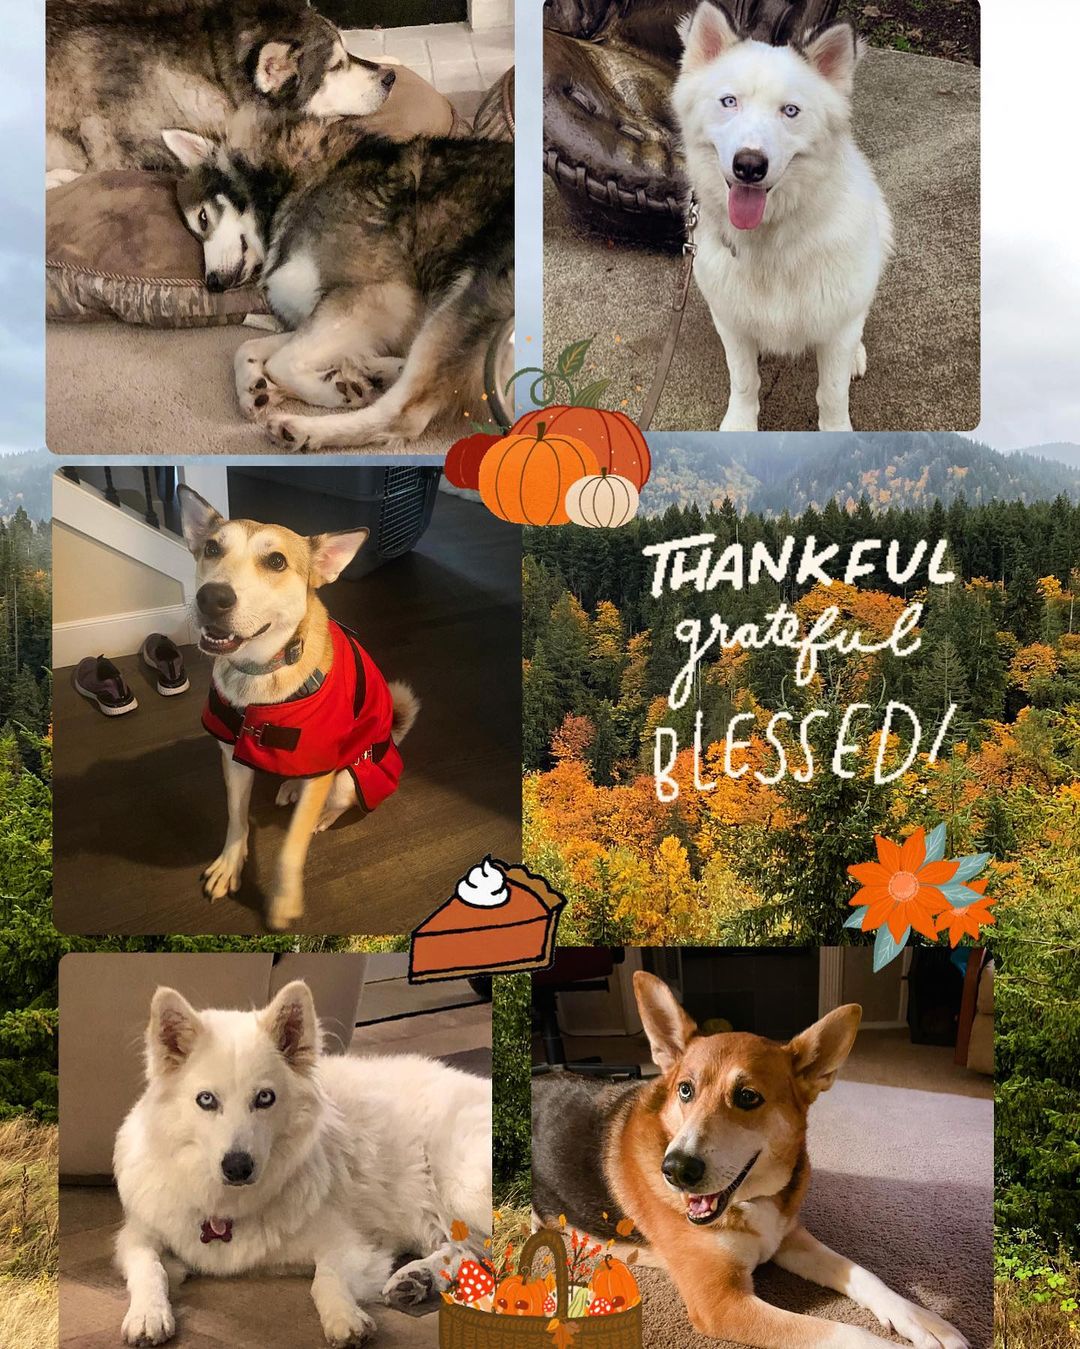 Happy Thanksgiving!🍁🐕🧡 So thankful for each one of these puppers, the lovely families they are part of now, their amazing rescuer @mtlebanondogshelter and the kind hearted people who made their happily ever after possible! I couldn’t have imagined being part of this wonderful experience! 🥲❤️ <a target='_blank' href='https://www.instagram.com/explore/tags/WeGiveThanksToGod/'>#WeGiveThanksToGod</a> <a target='_blank' href='https://www.instagram.com/explore/tags/rescuedismyfavoritebreed/'>#rescuedismyfavoritebreed</a>  <a target='_blank' href='https://www.instagram.com/explore/tags/happiness/'>#happiness</a> <a target='_blank' href='https://www.instagram.com/explore/tags/thankful/'>#thankful</a> <a target='_blank' href='https://www.instagram.com/explore/tags/blessed/'>#blessed</a> <a target='_blank' href='https://www.instagram.com/explore/tags/happilyadopted/'>#happilyadopted</a> <a target='_blank' href='https://www.instagram.com/explore/tags/huskies/'>#huskies</a>